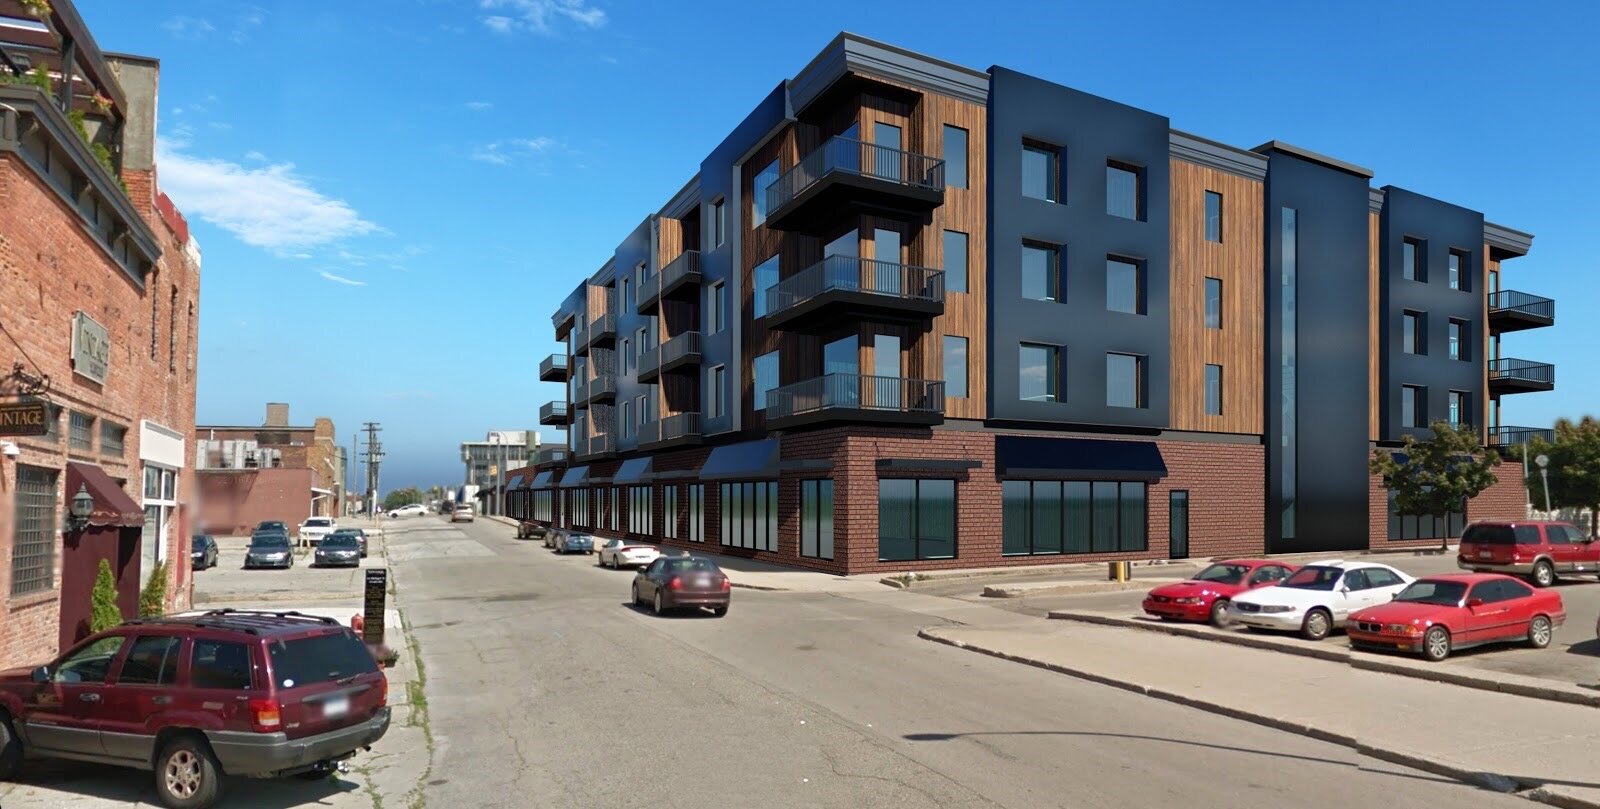 A rendering of the Wrigley Center development in downtown Port Huron